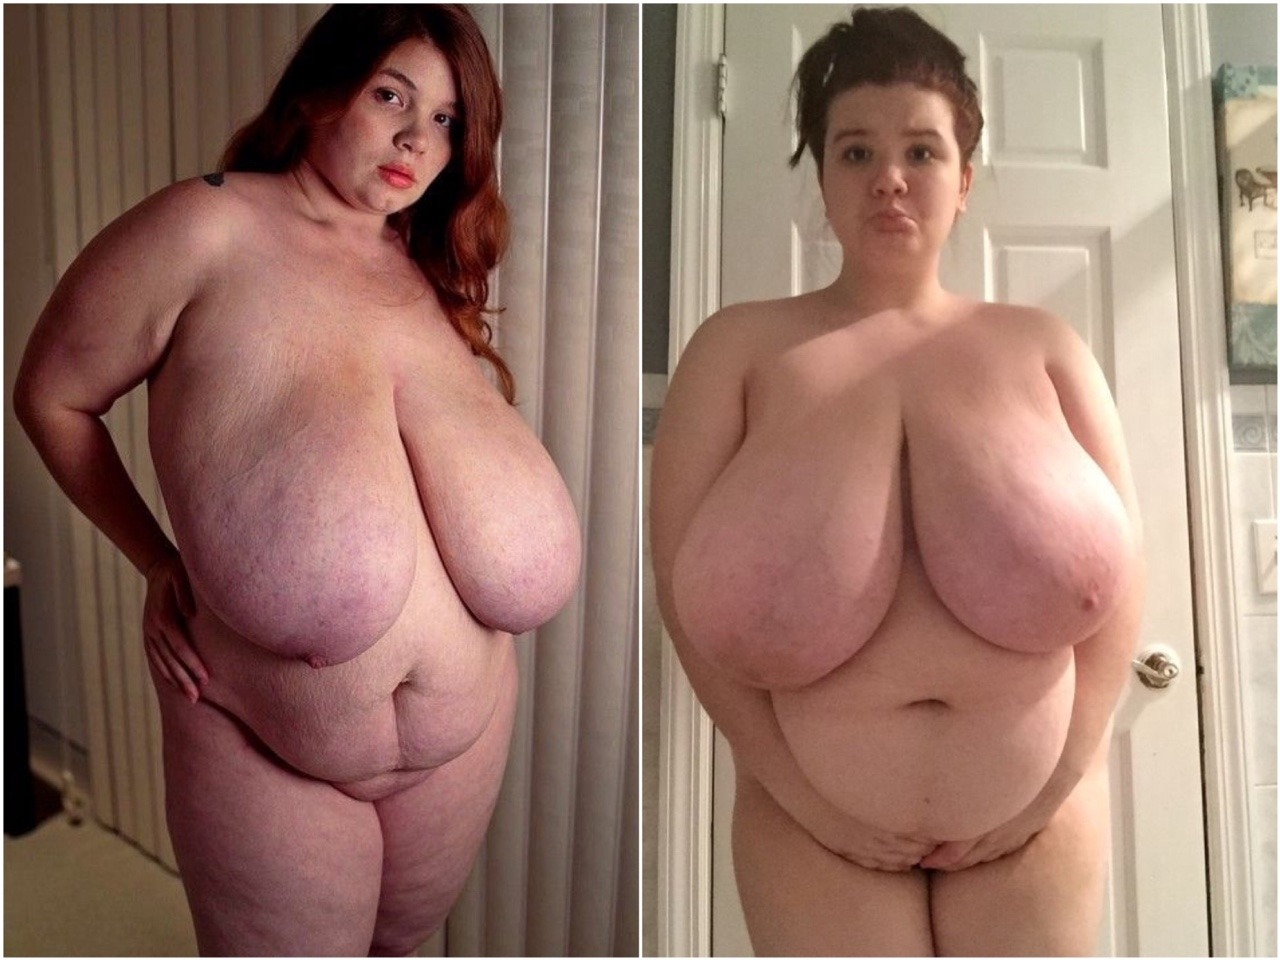 funbaggery:  Imagine if they were sisters though. Giant bras hanging up everywhere.